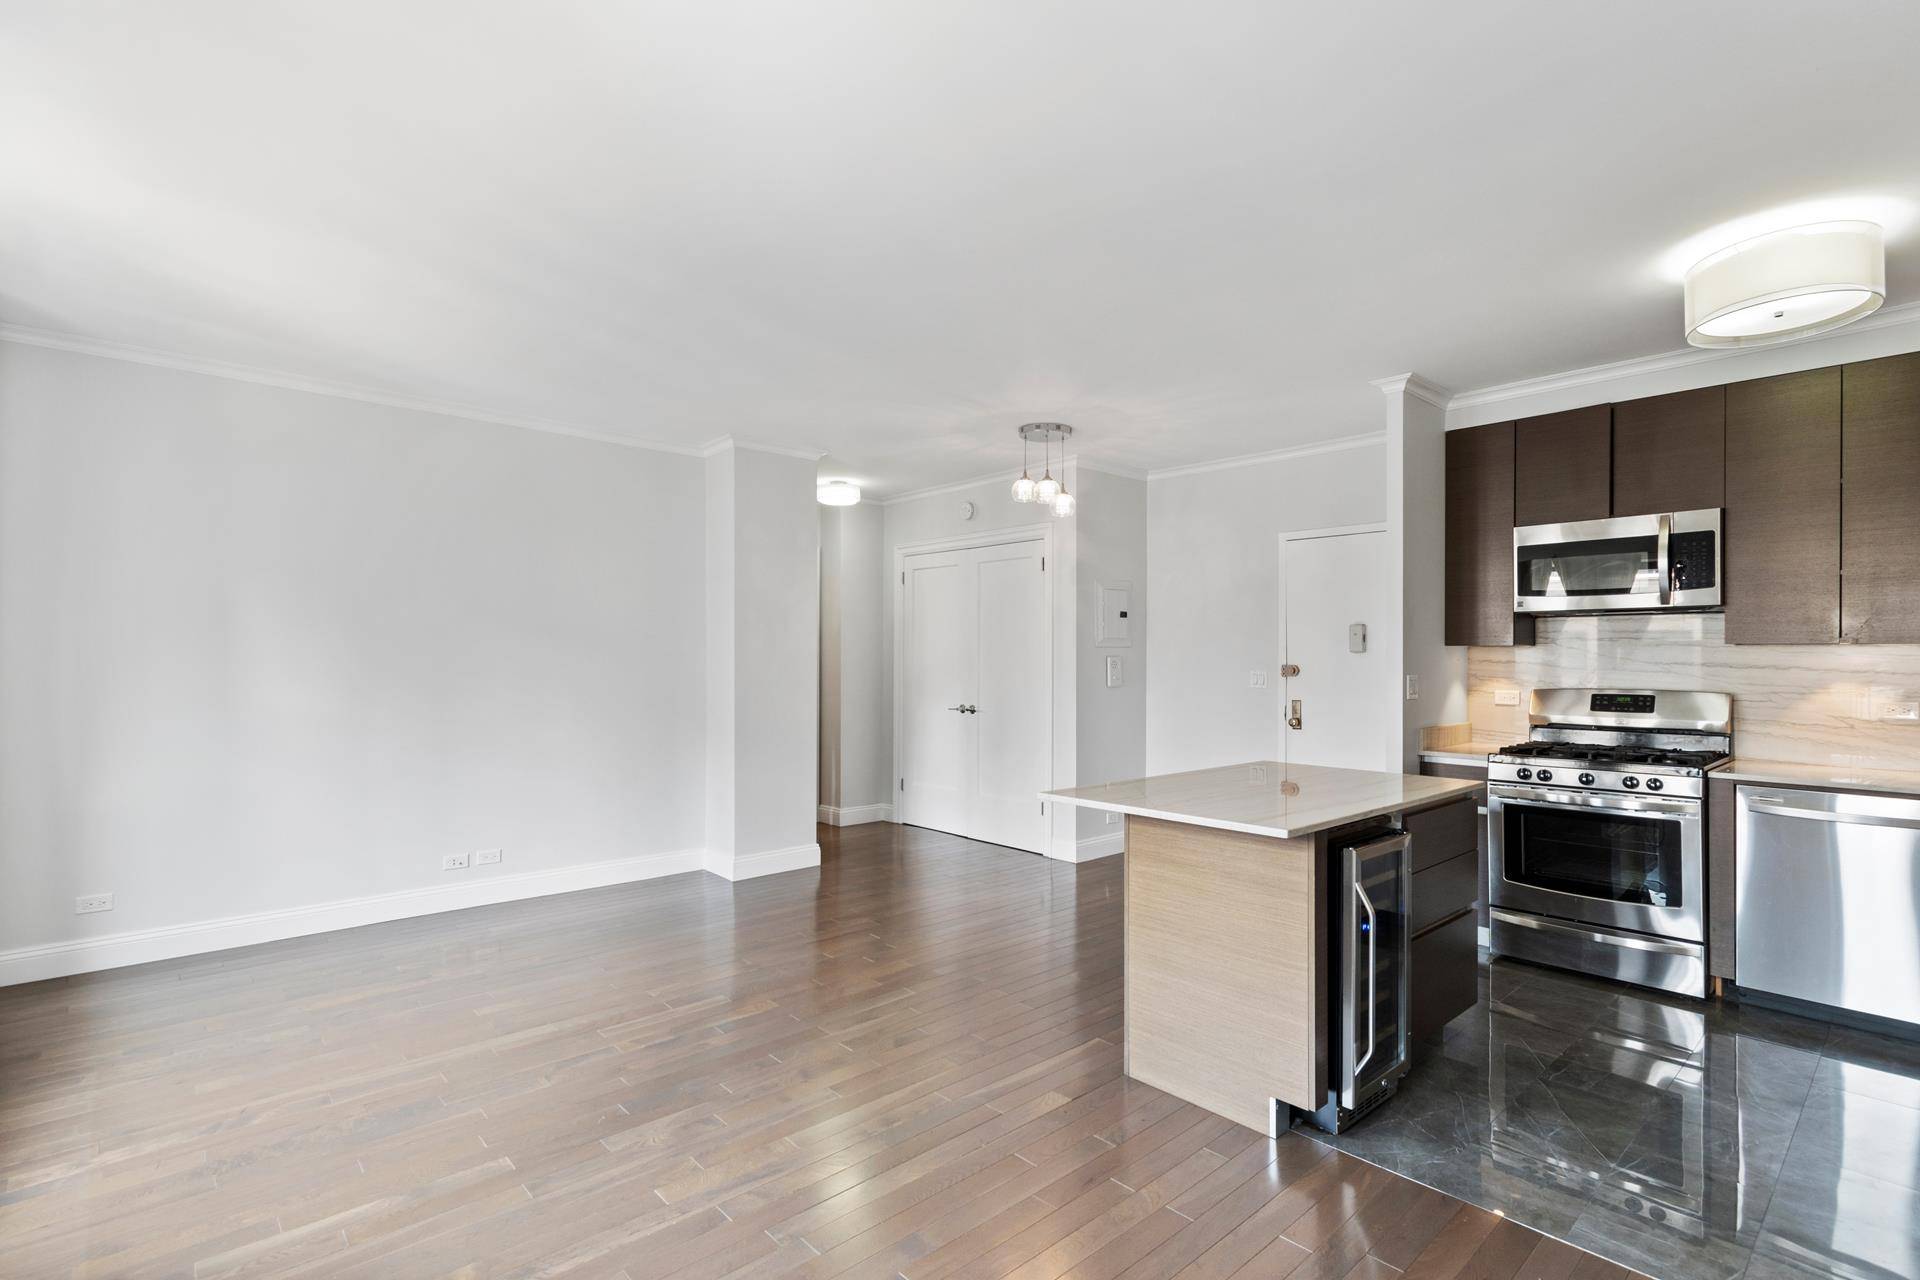 JUST LISTEDXXX MINT 1 Bedroom Condo for SALE in Murray Hill.